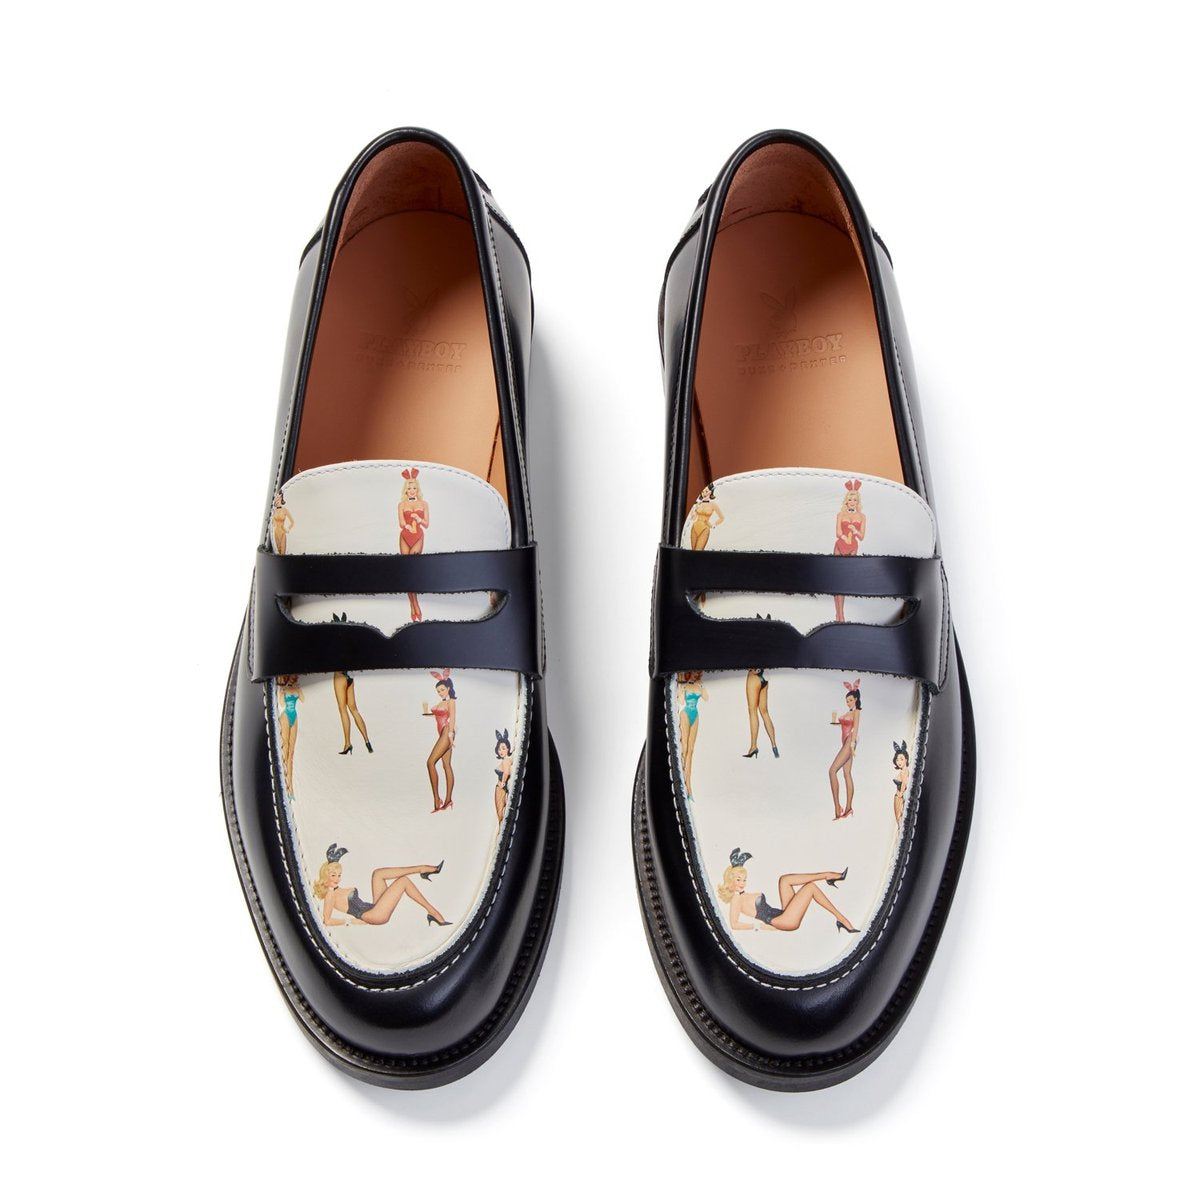 Duke + Dexter Vintage Pin-Up Penny Loafers